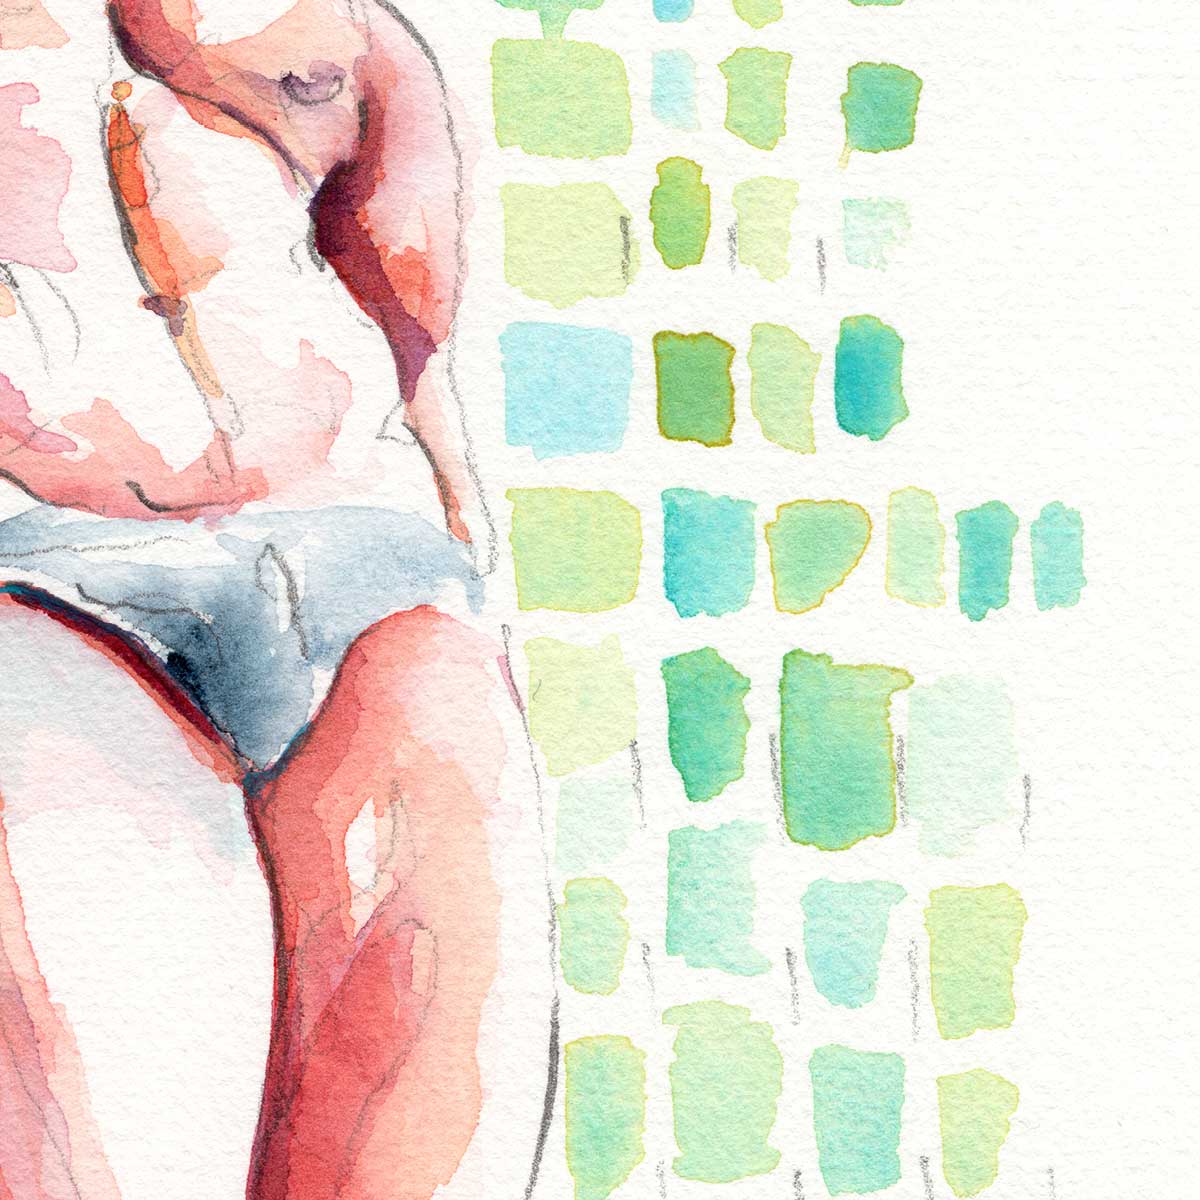 Male Swimmer Leaning in a Speedo - Original Watercolor Painting